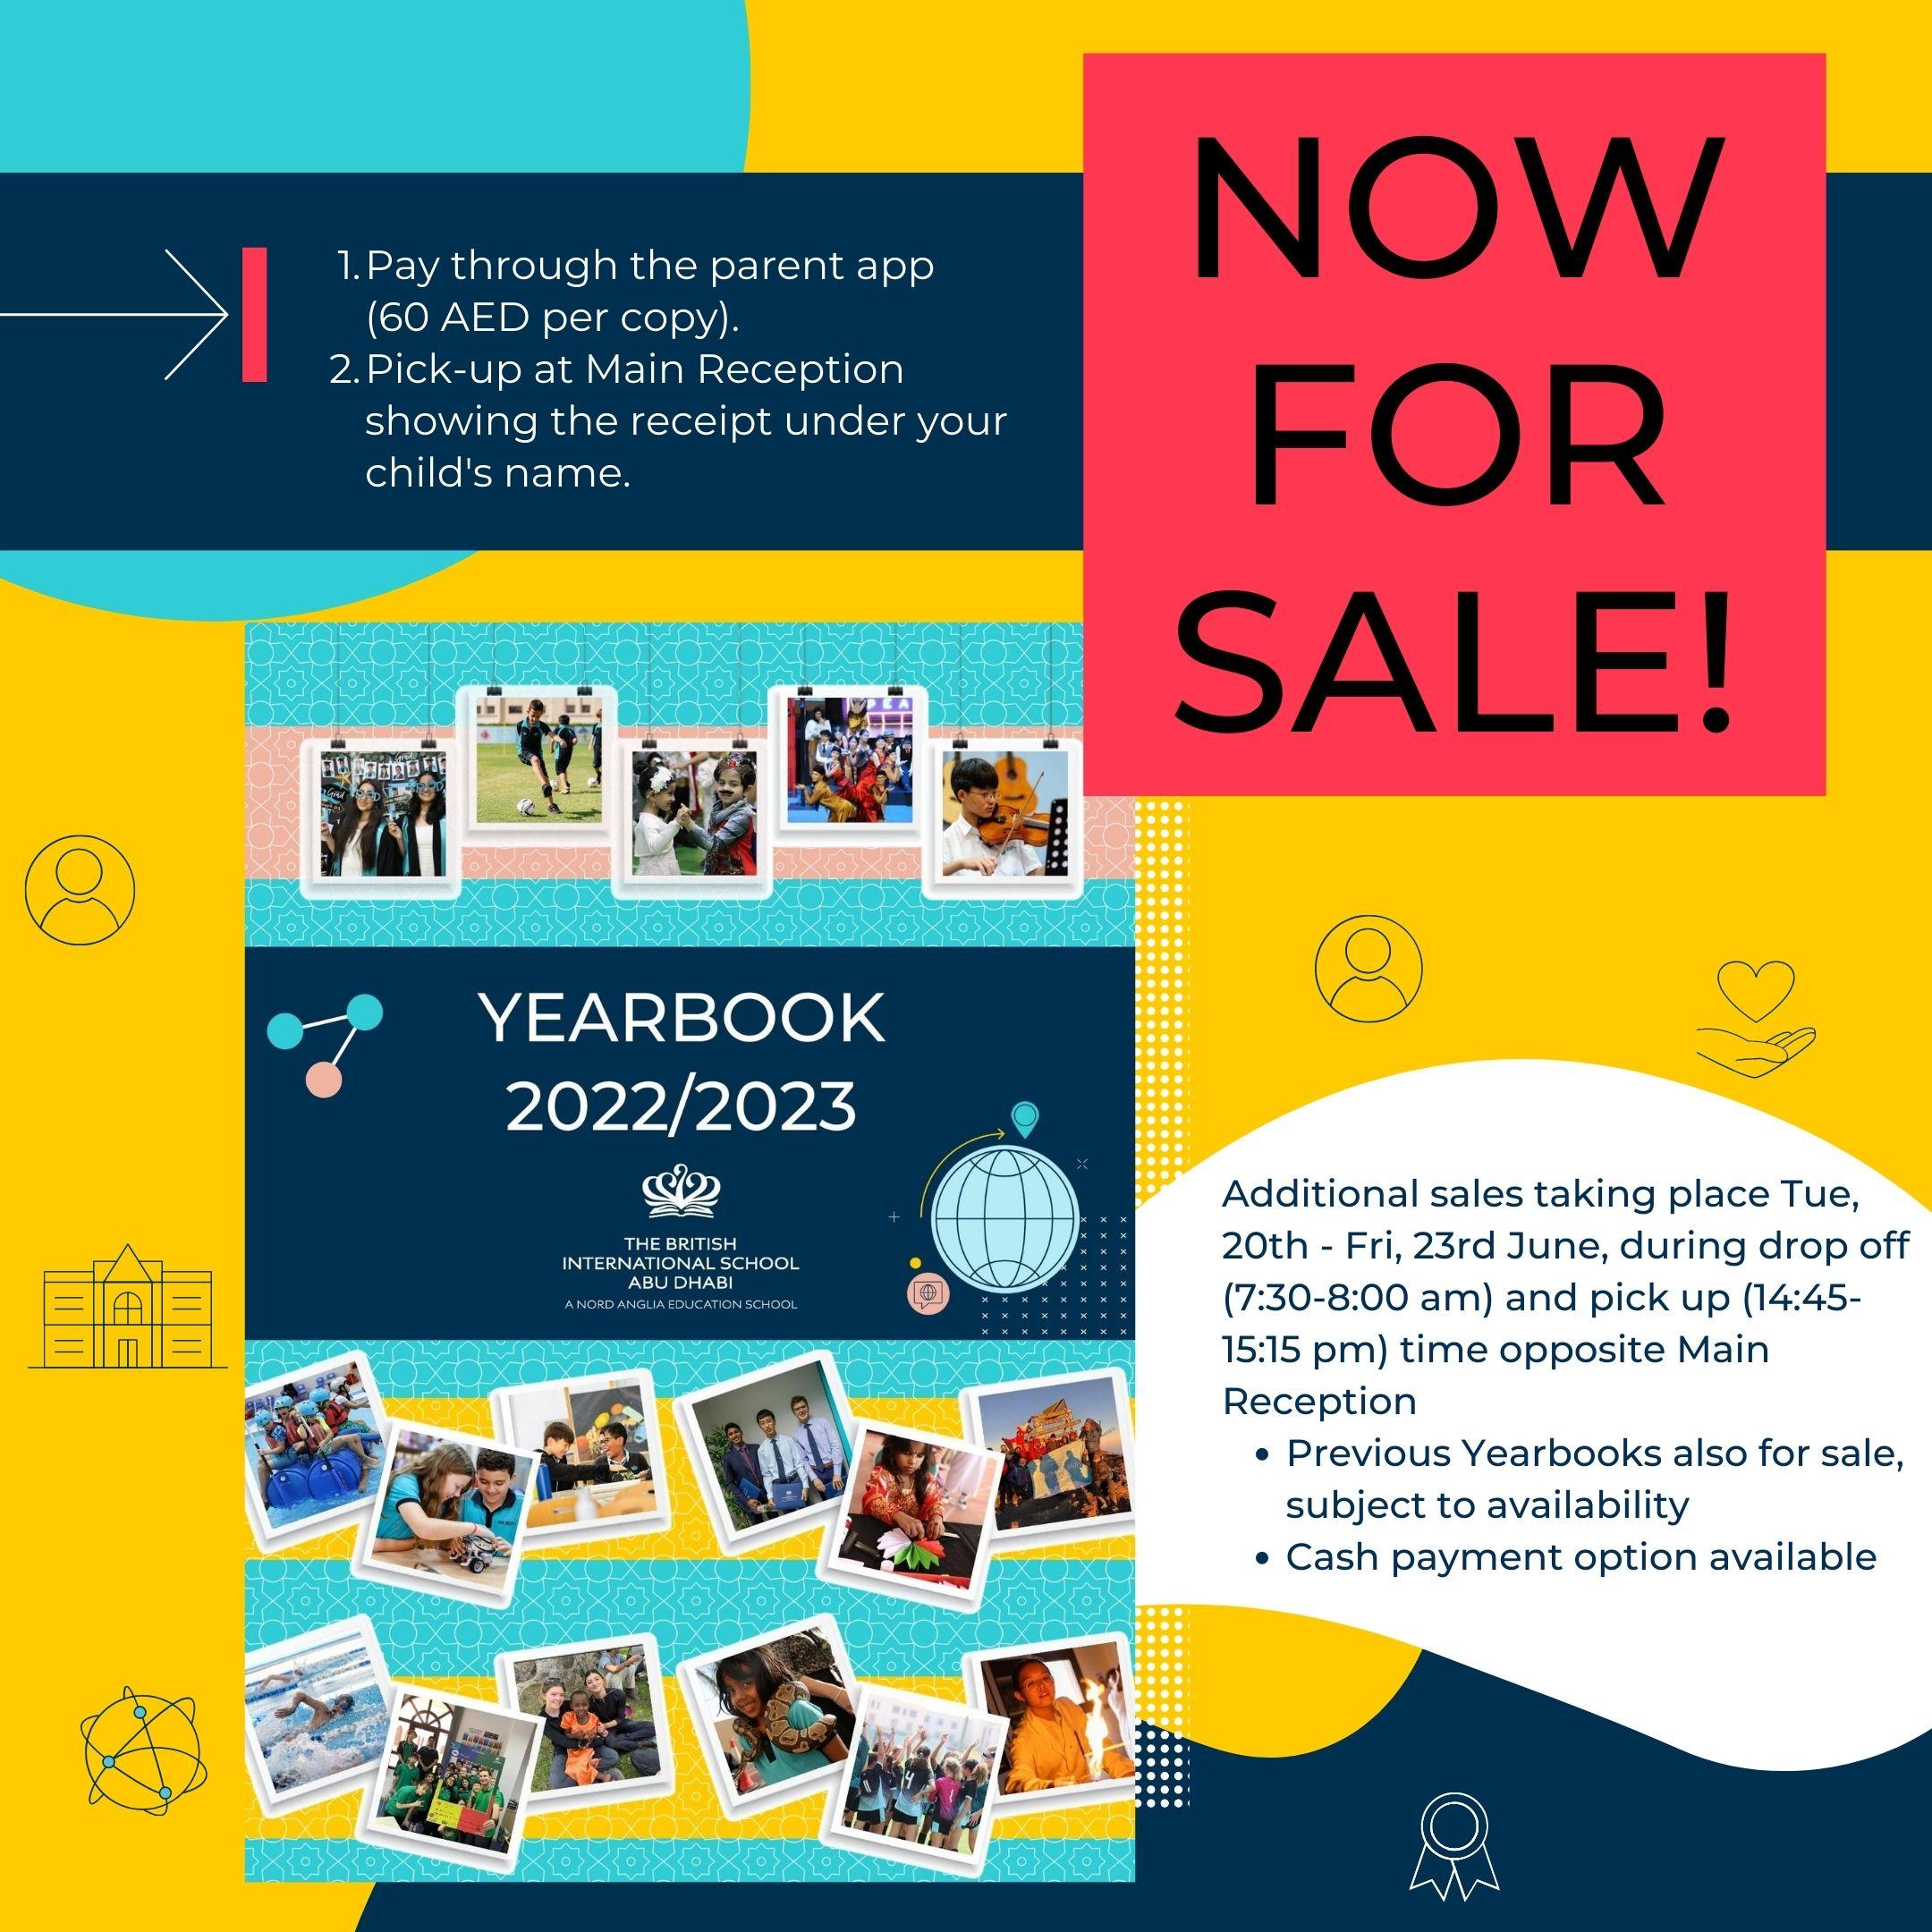 Pre-orders for the Yearbook 2022-2023 - Pre-orders for the Yearbook 2022-2023